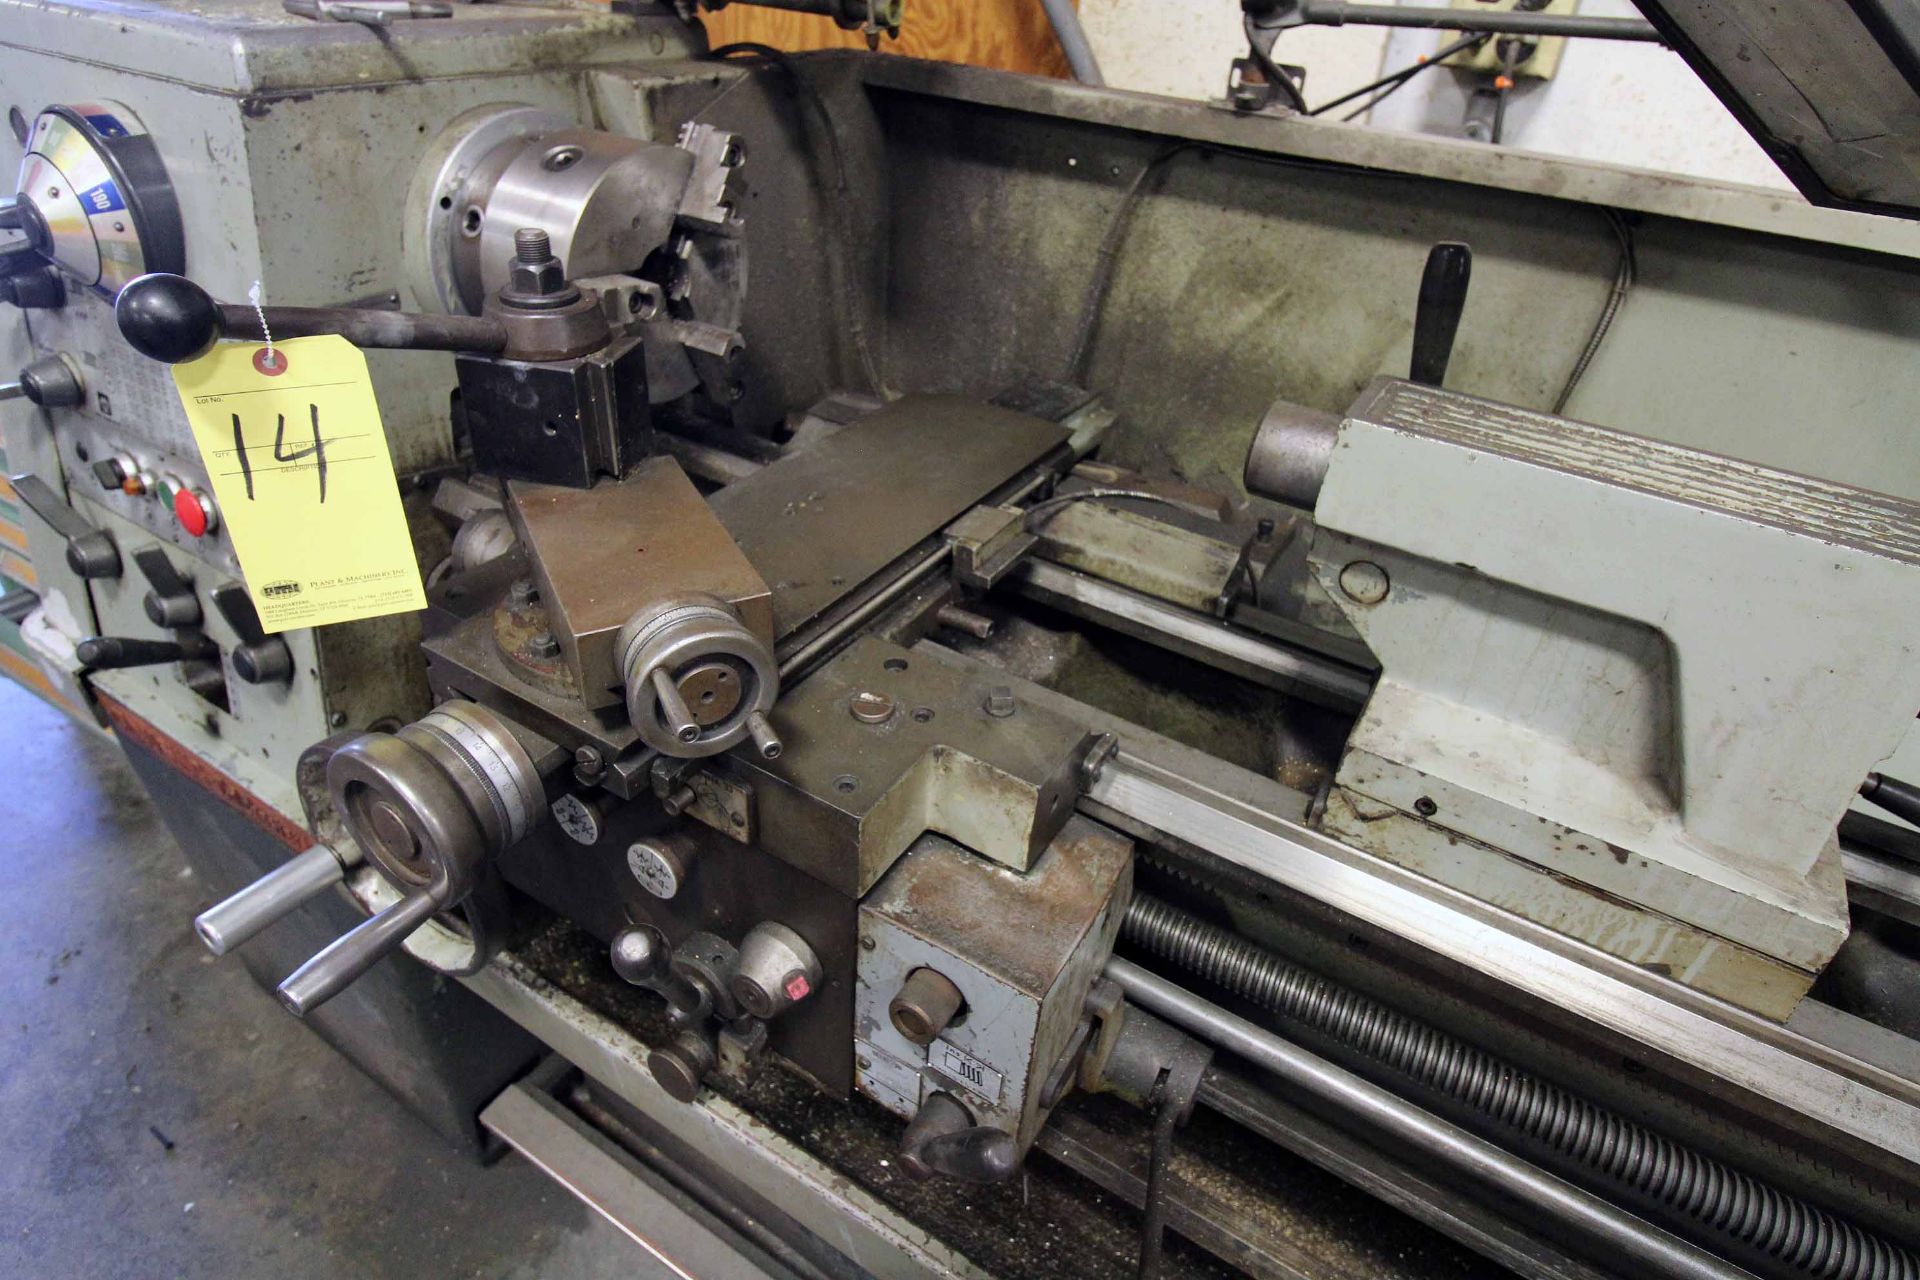 ENGINE LATHE, CLAUSING COLCHESTER 15” X 50”, Newall D.R.O., taper attach., steadyrest, rotating - Image 5 of 6